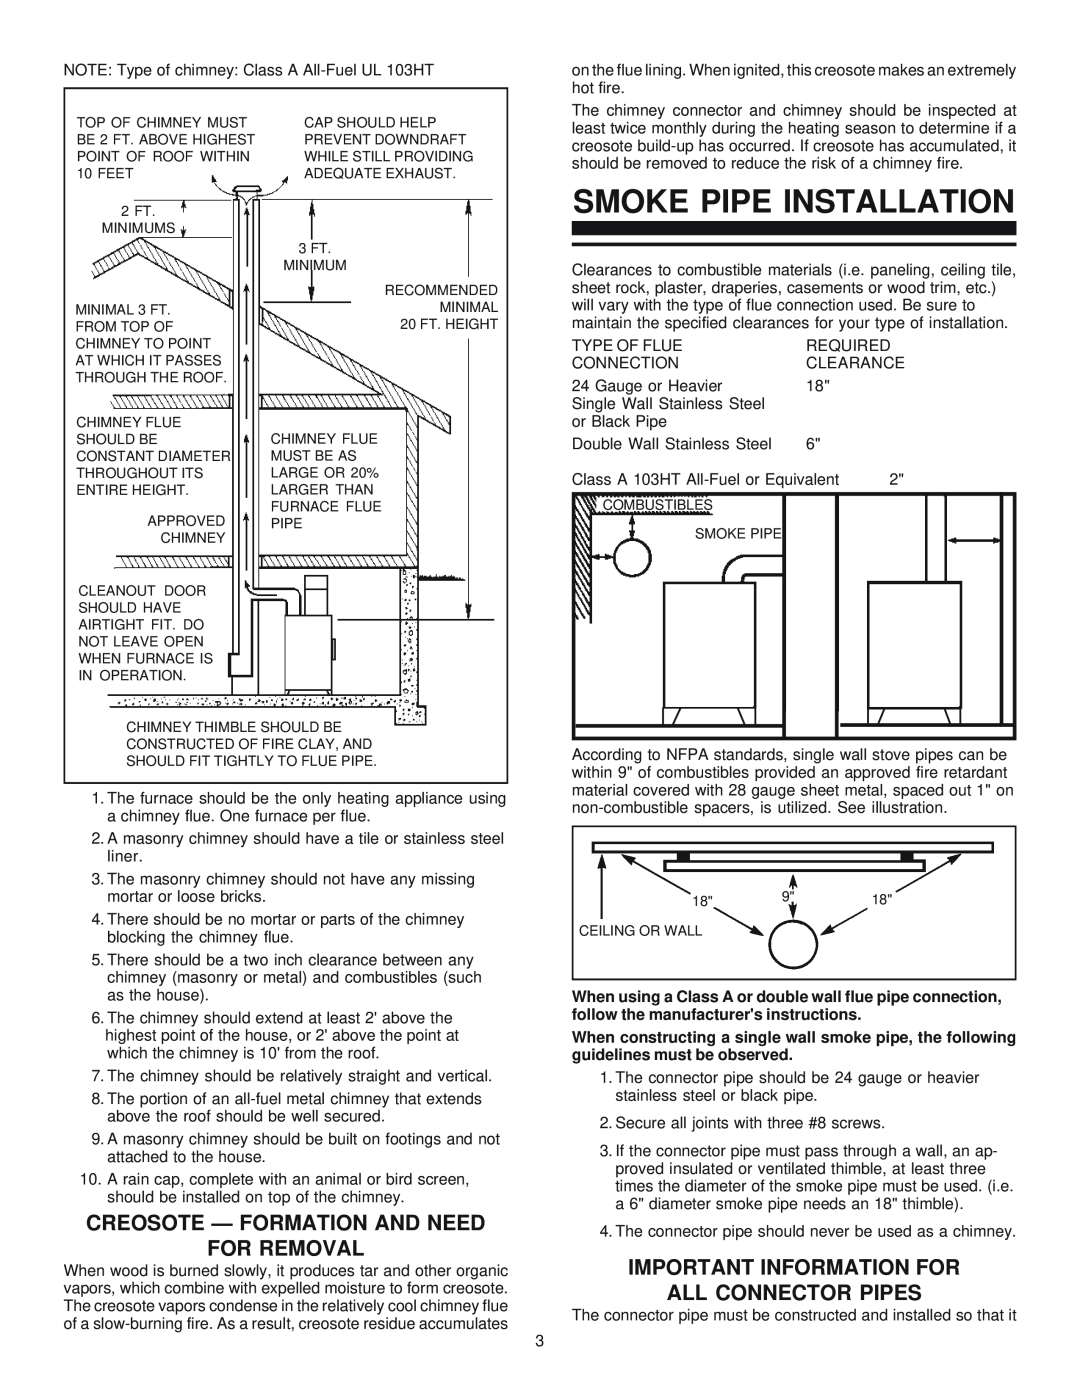 United States Stove 1600M manual Smoke Pipe Installation, Creosote - Formation And Need For Removal 